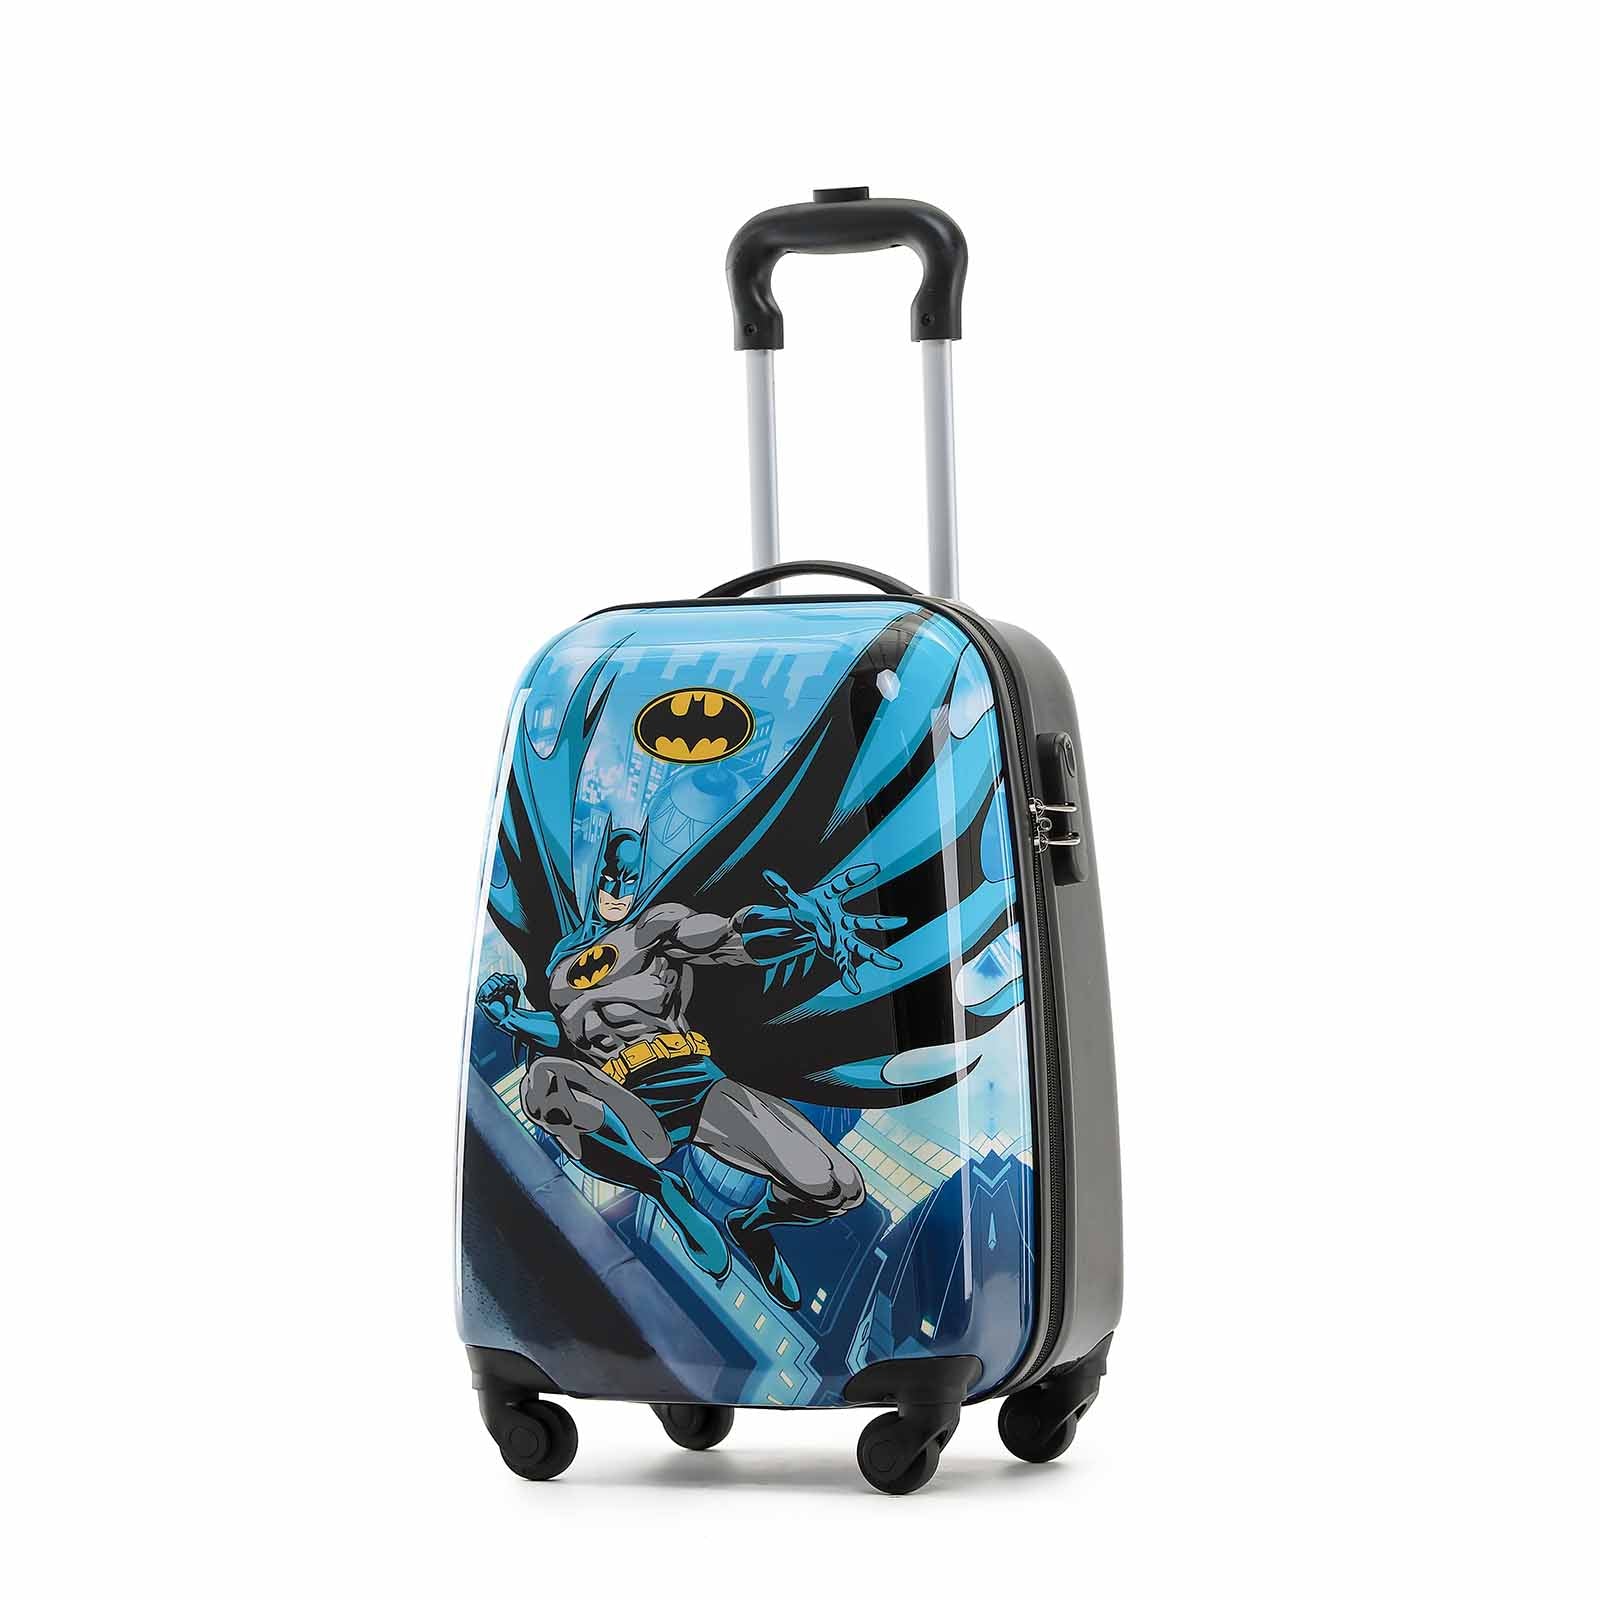 Warner Brothers Batman 17inch Carry-On Suitcase